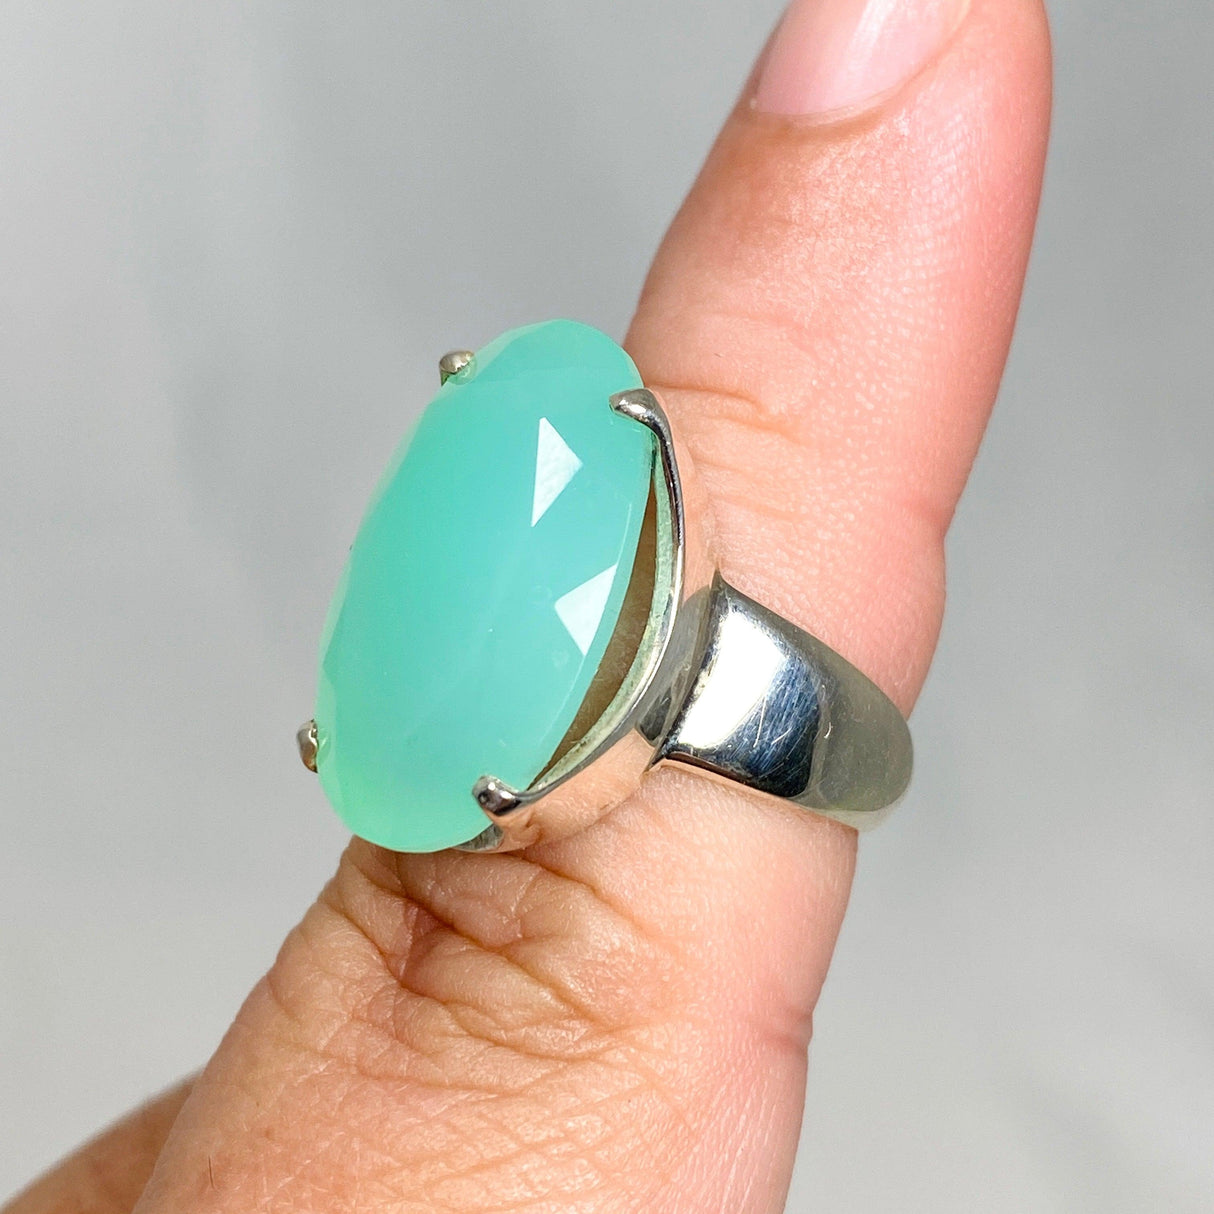 Chrysoprase Faceted Oval Ring Size 7.5 PRGJ469 - Nature's Magick